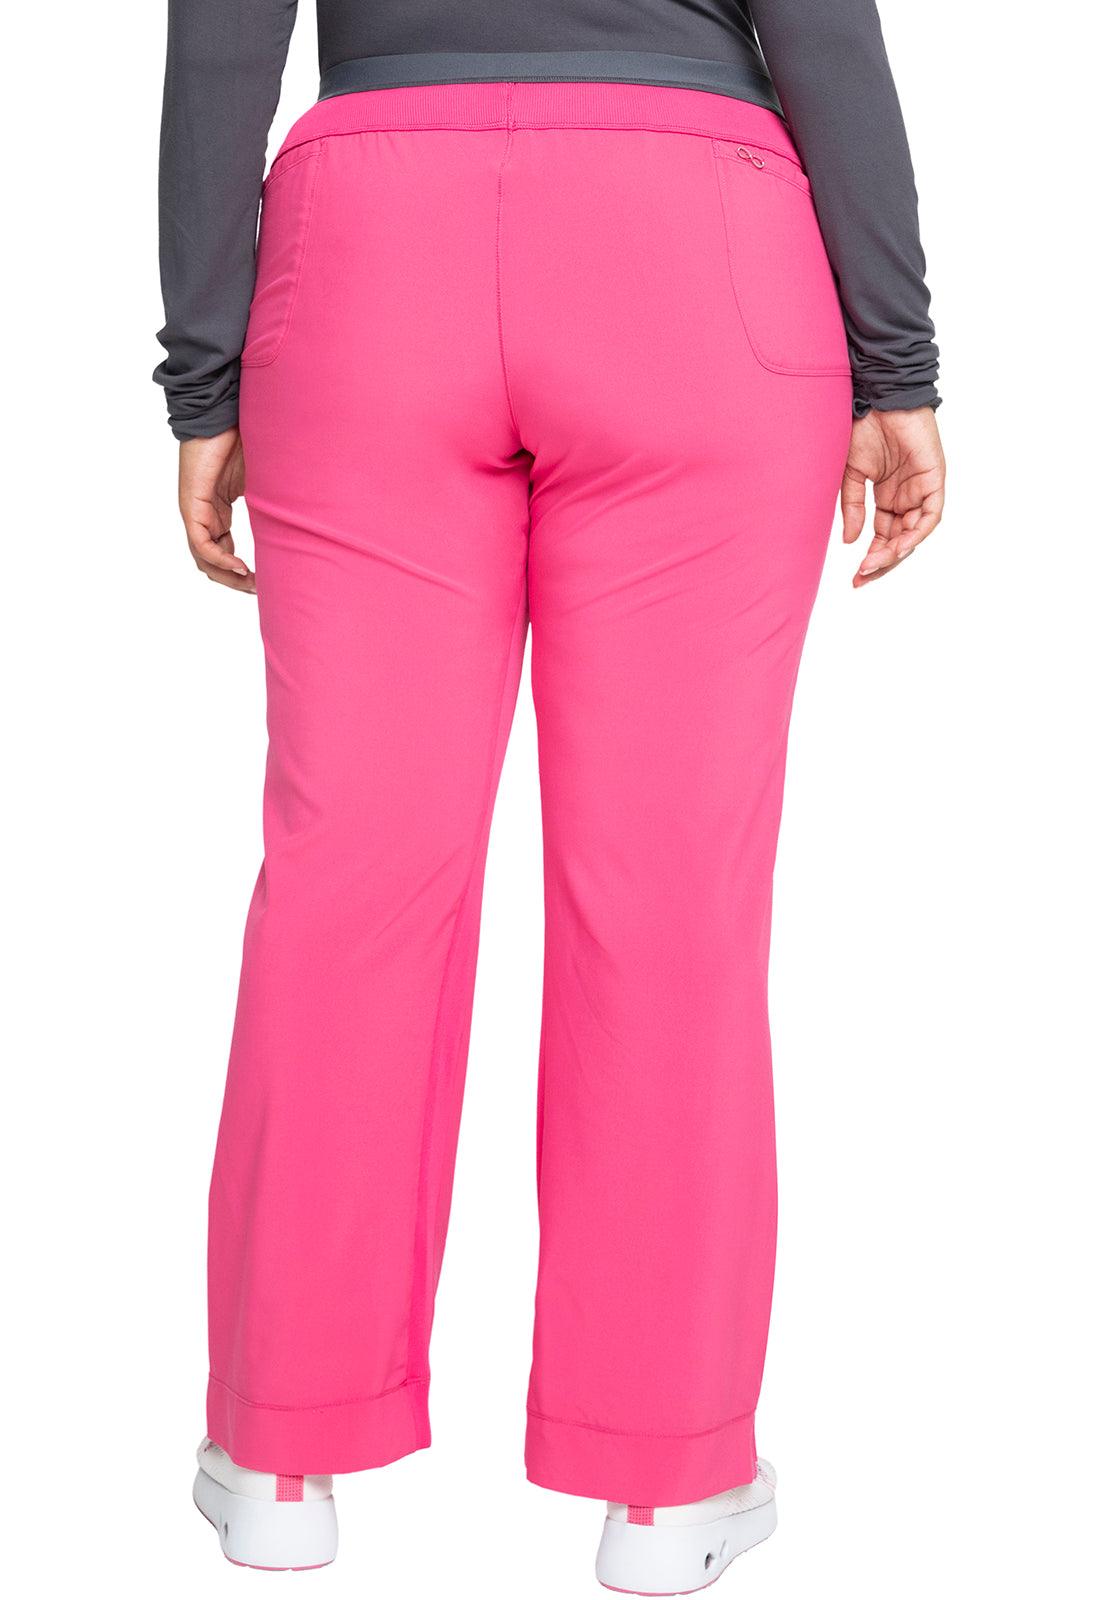 Infinity Slim Pull-On Pant 1124A - 21Bmedical